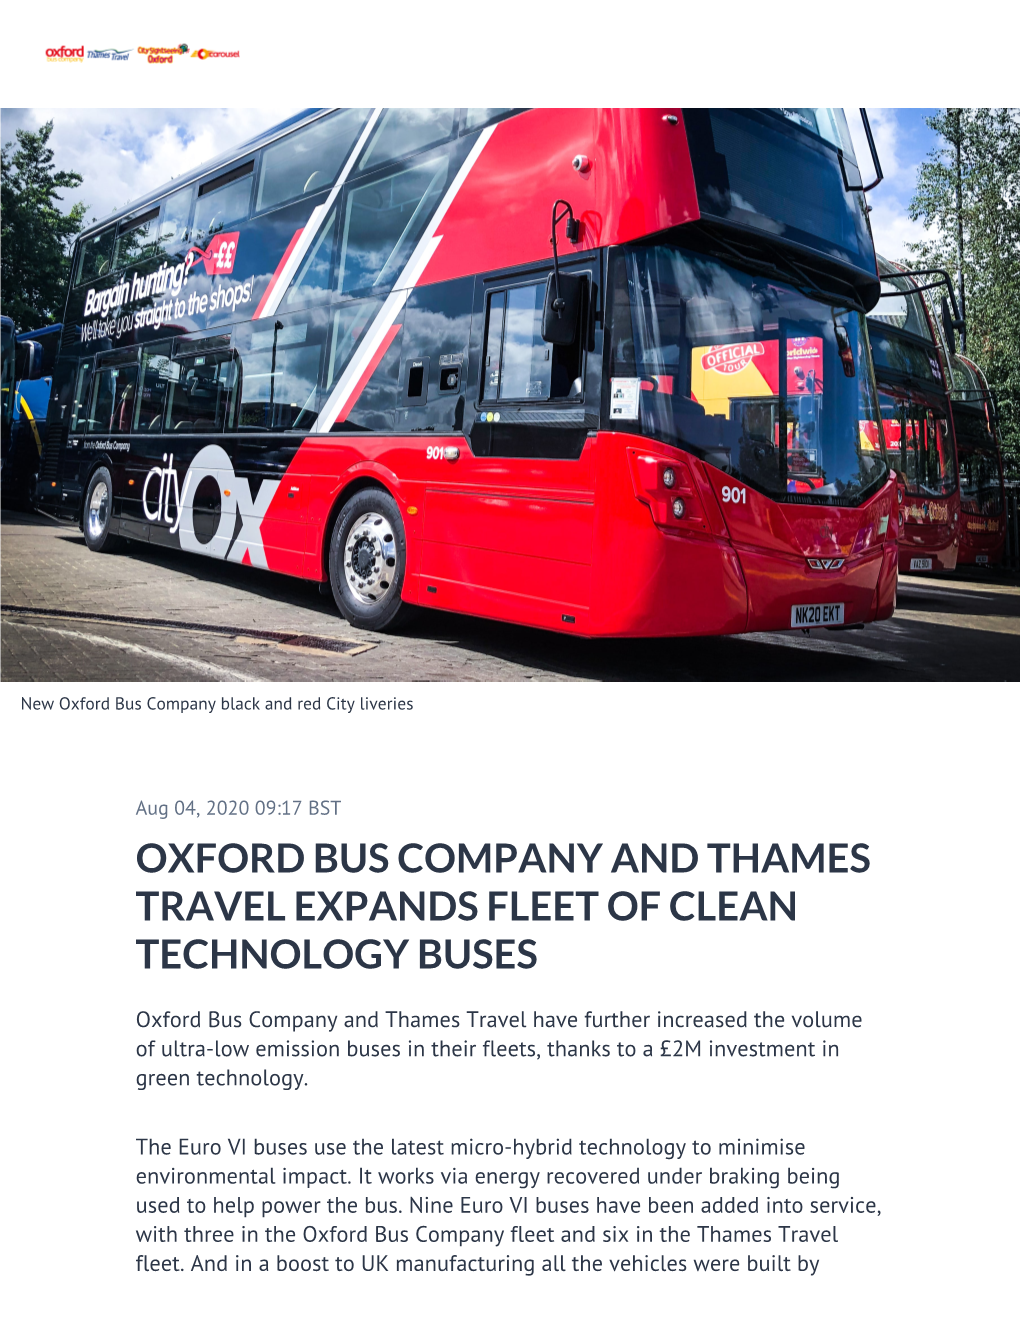 Oxford Bus Company and Thames Travel Expands Fleet of Clean Technology Buses